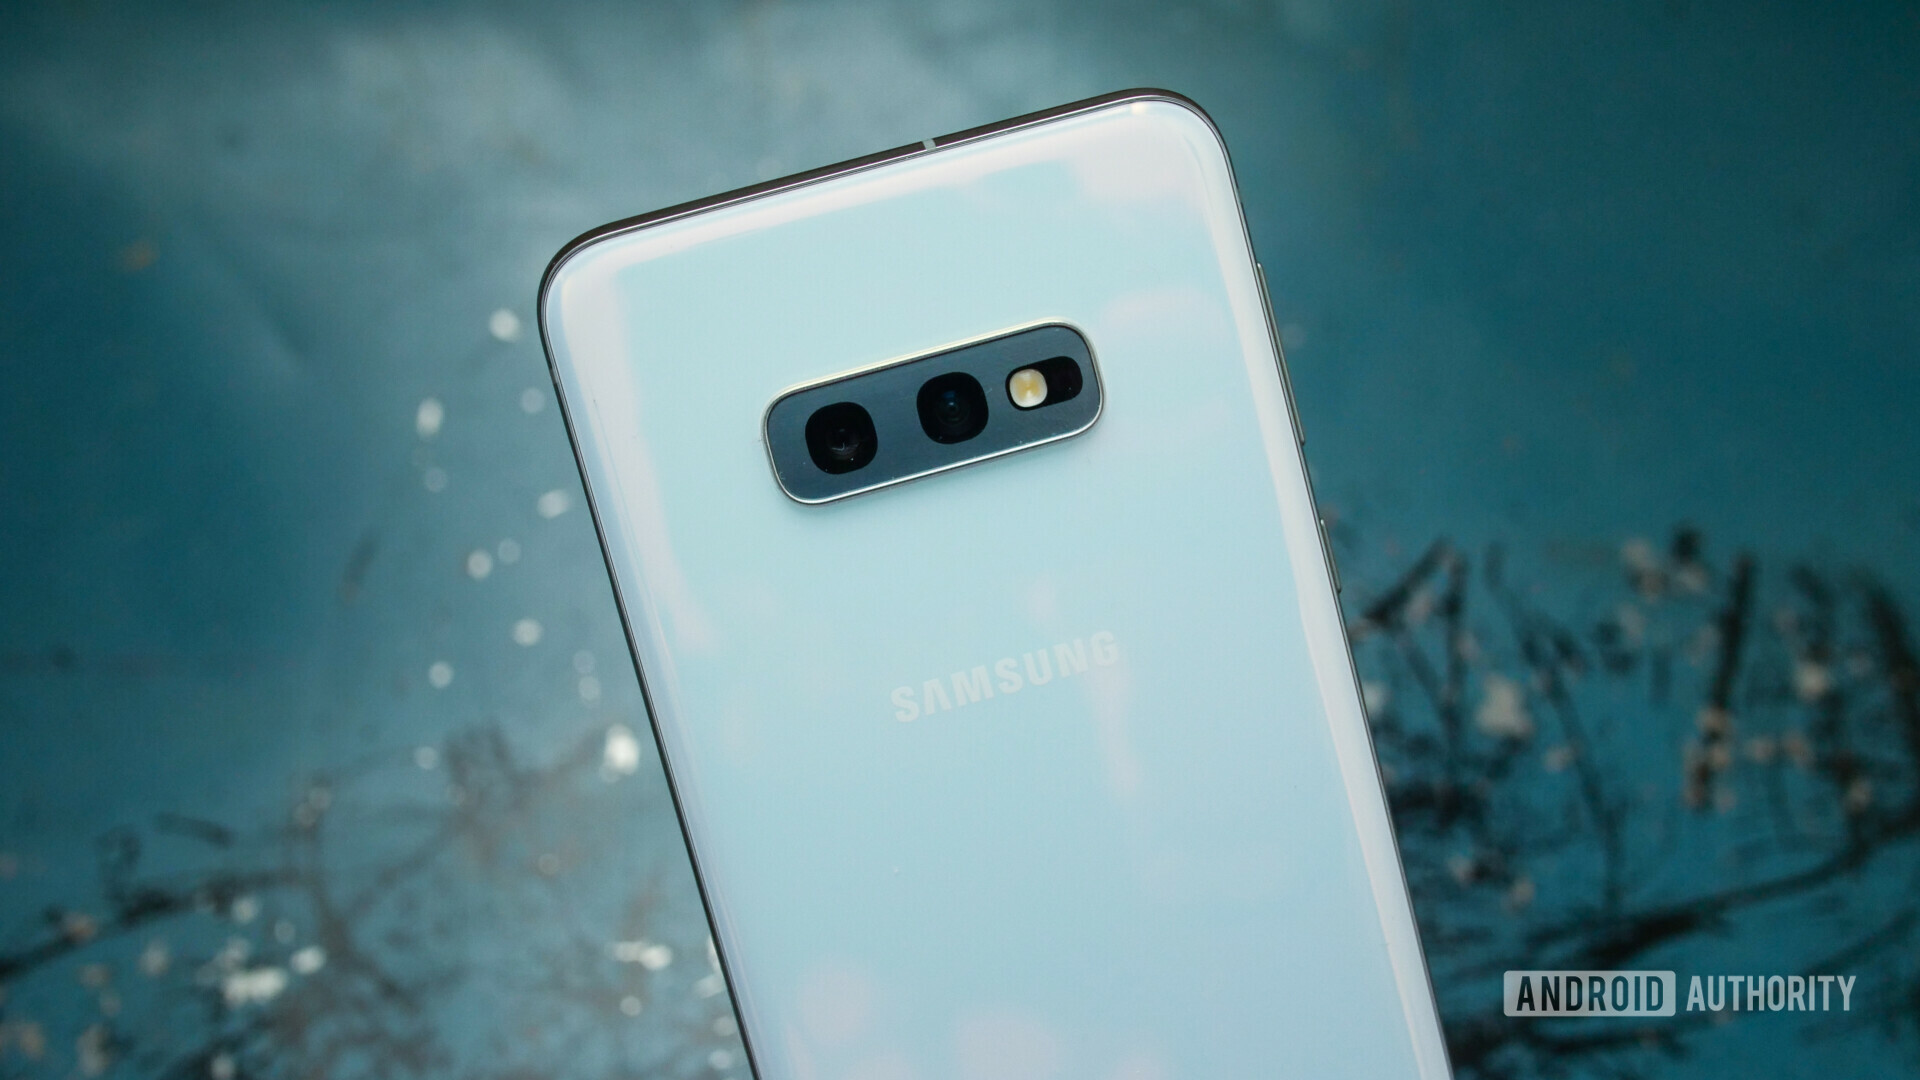 Back side photo of the samsung galaxy s10e in white color, focusing on the dual cameras.